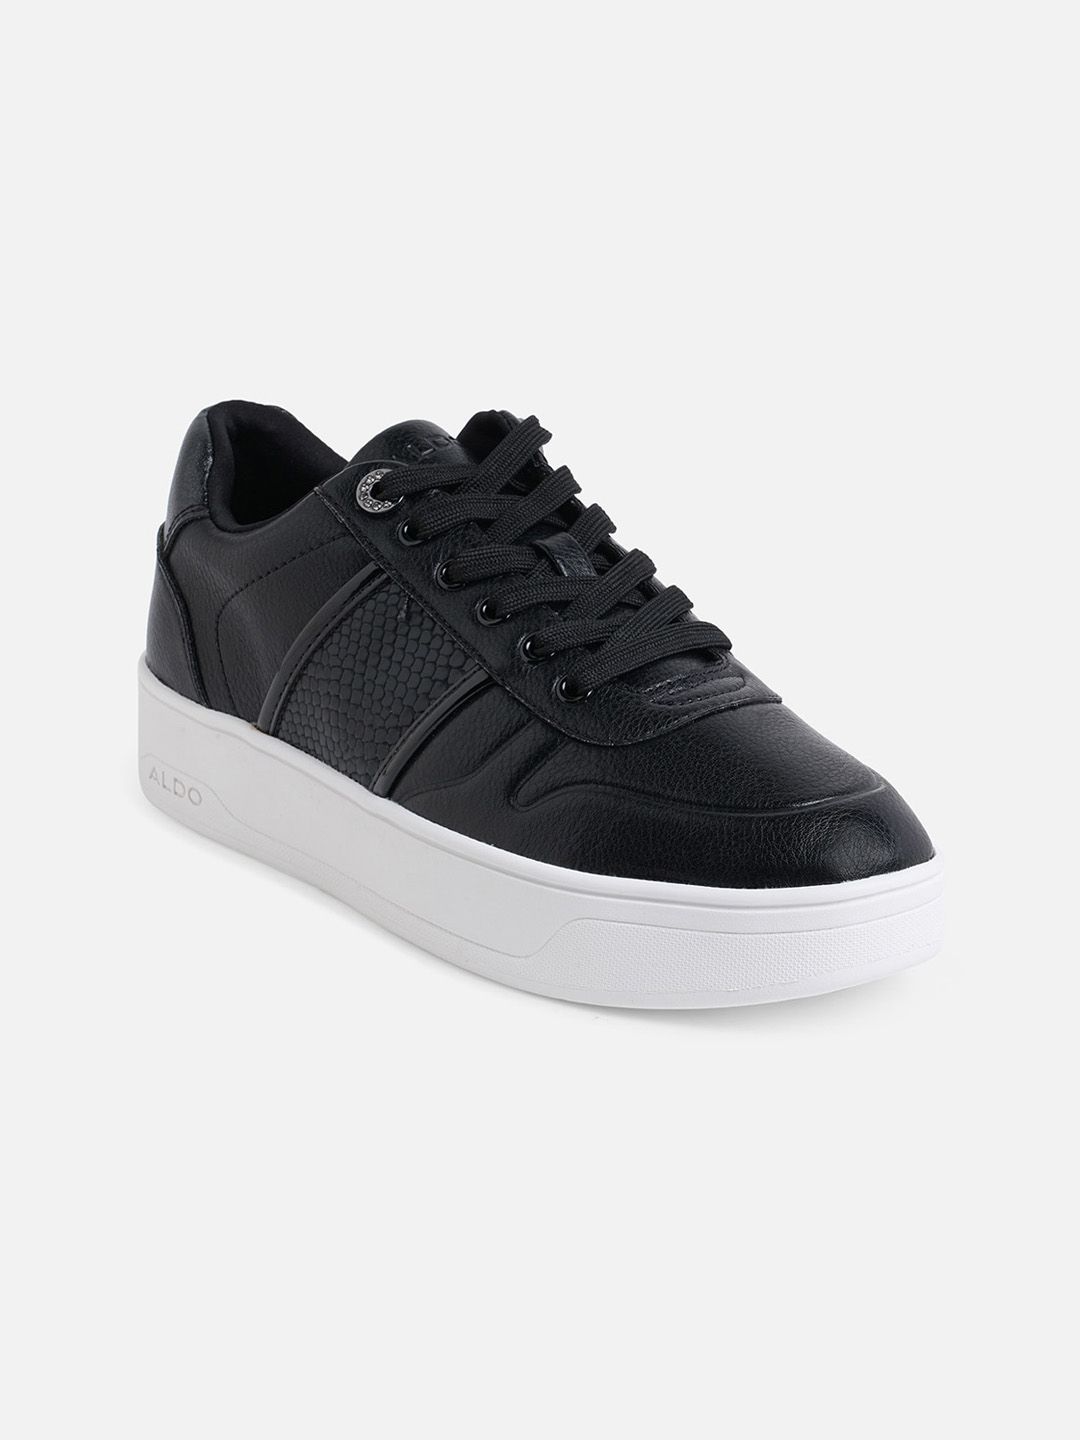 ALDO Women Black Lace Up Sneakers Price in India